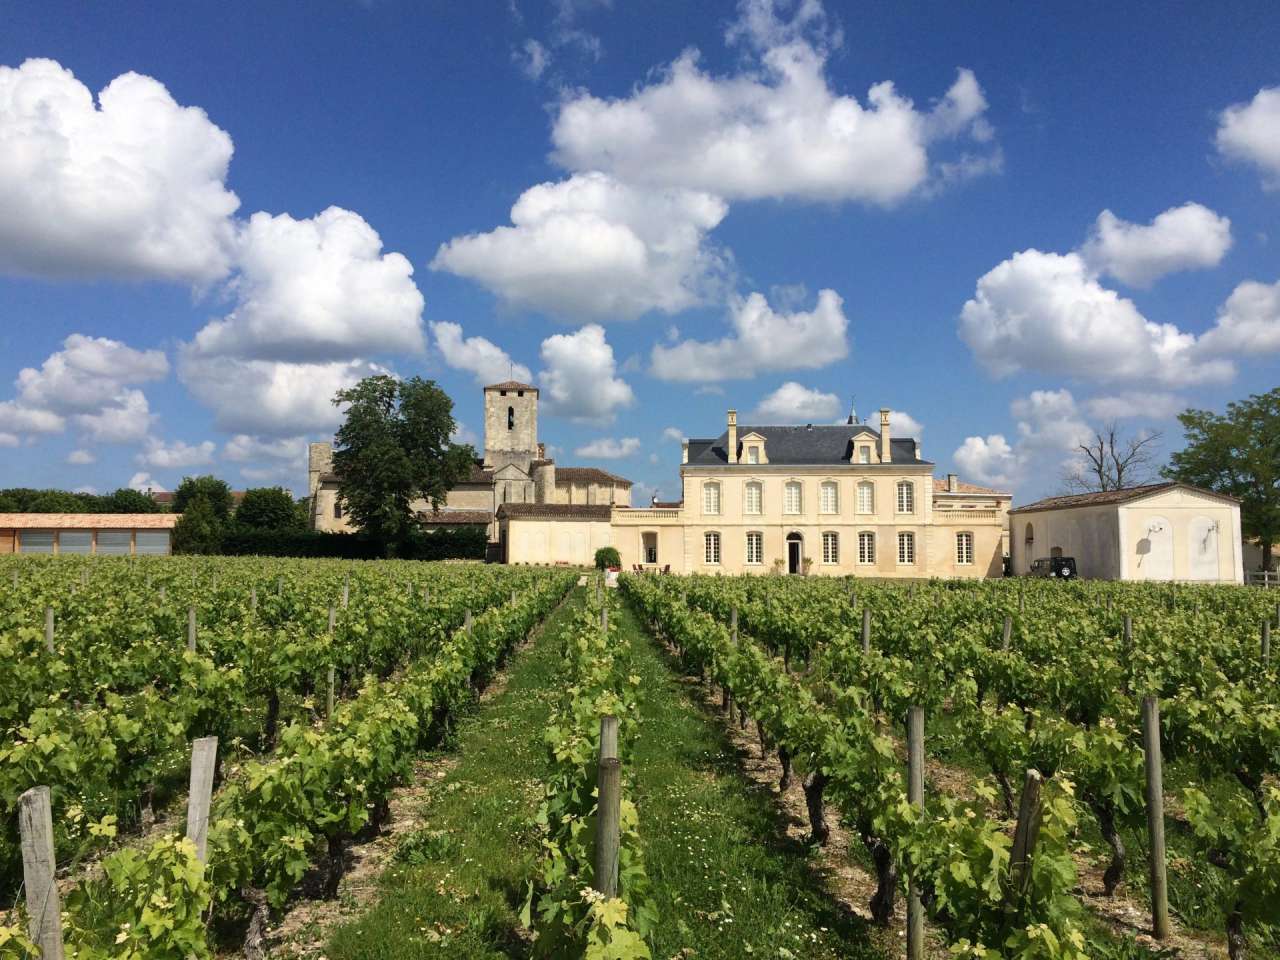 Luxurious Chateau and vineyard for sale in Le Taillan Medoc.